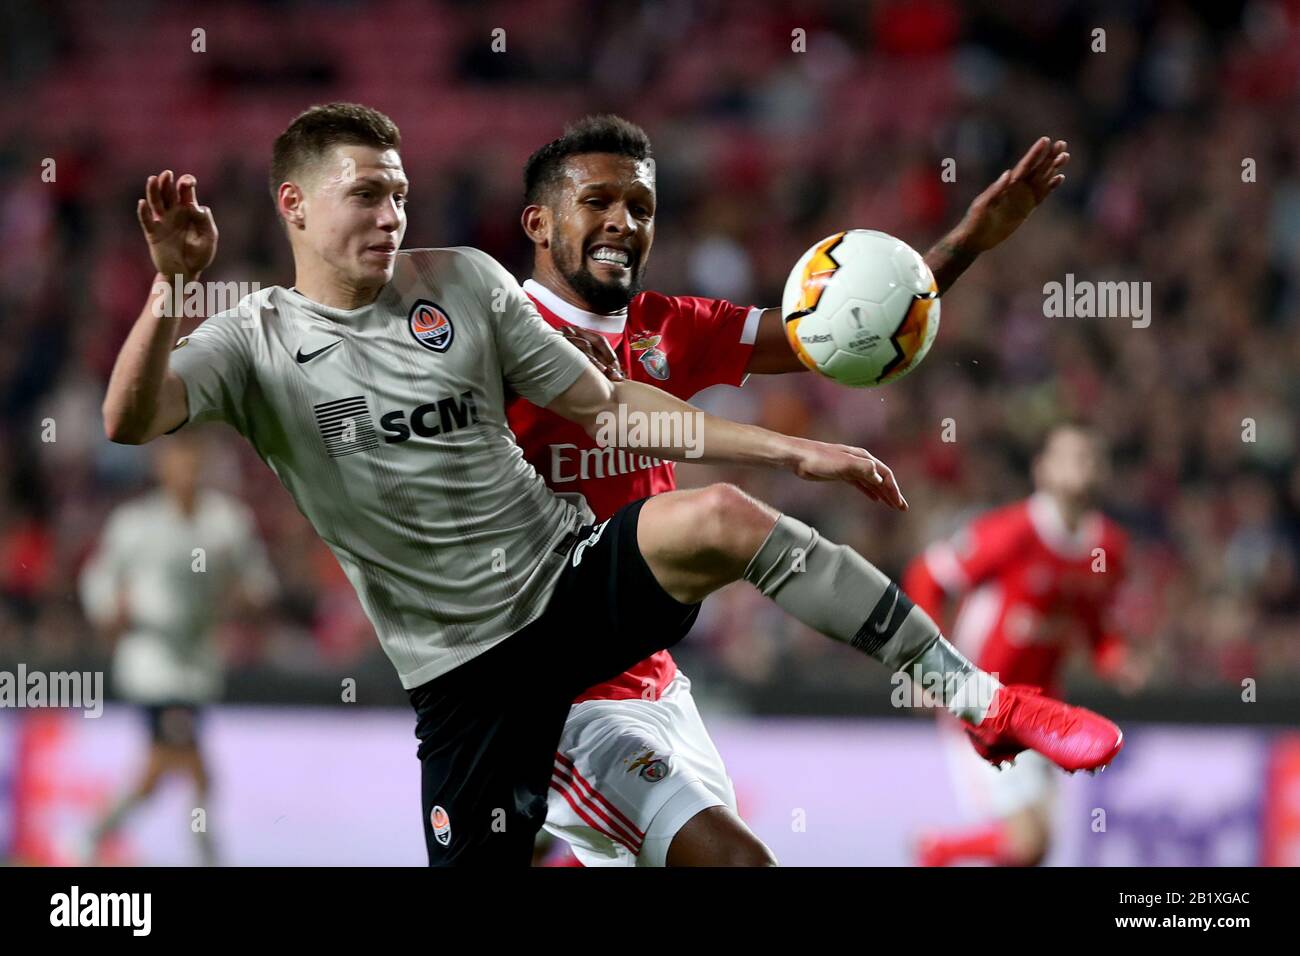 Lisbon, Portugal. 27th Feb, 2020. Mykola Matvienko of Shakhtar Donetsk (L) vies with Dyego Sousa of SL Benfica during the UEFA Europa League round of 32 second leg football match between SL Benfica and Shakhtar Donetsk in Lisbon, Portugal, on Feb. 27, 2020. Credit: Pedro Fiuza/Xinhua/Alamy Live News Stock Photo